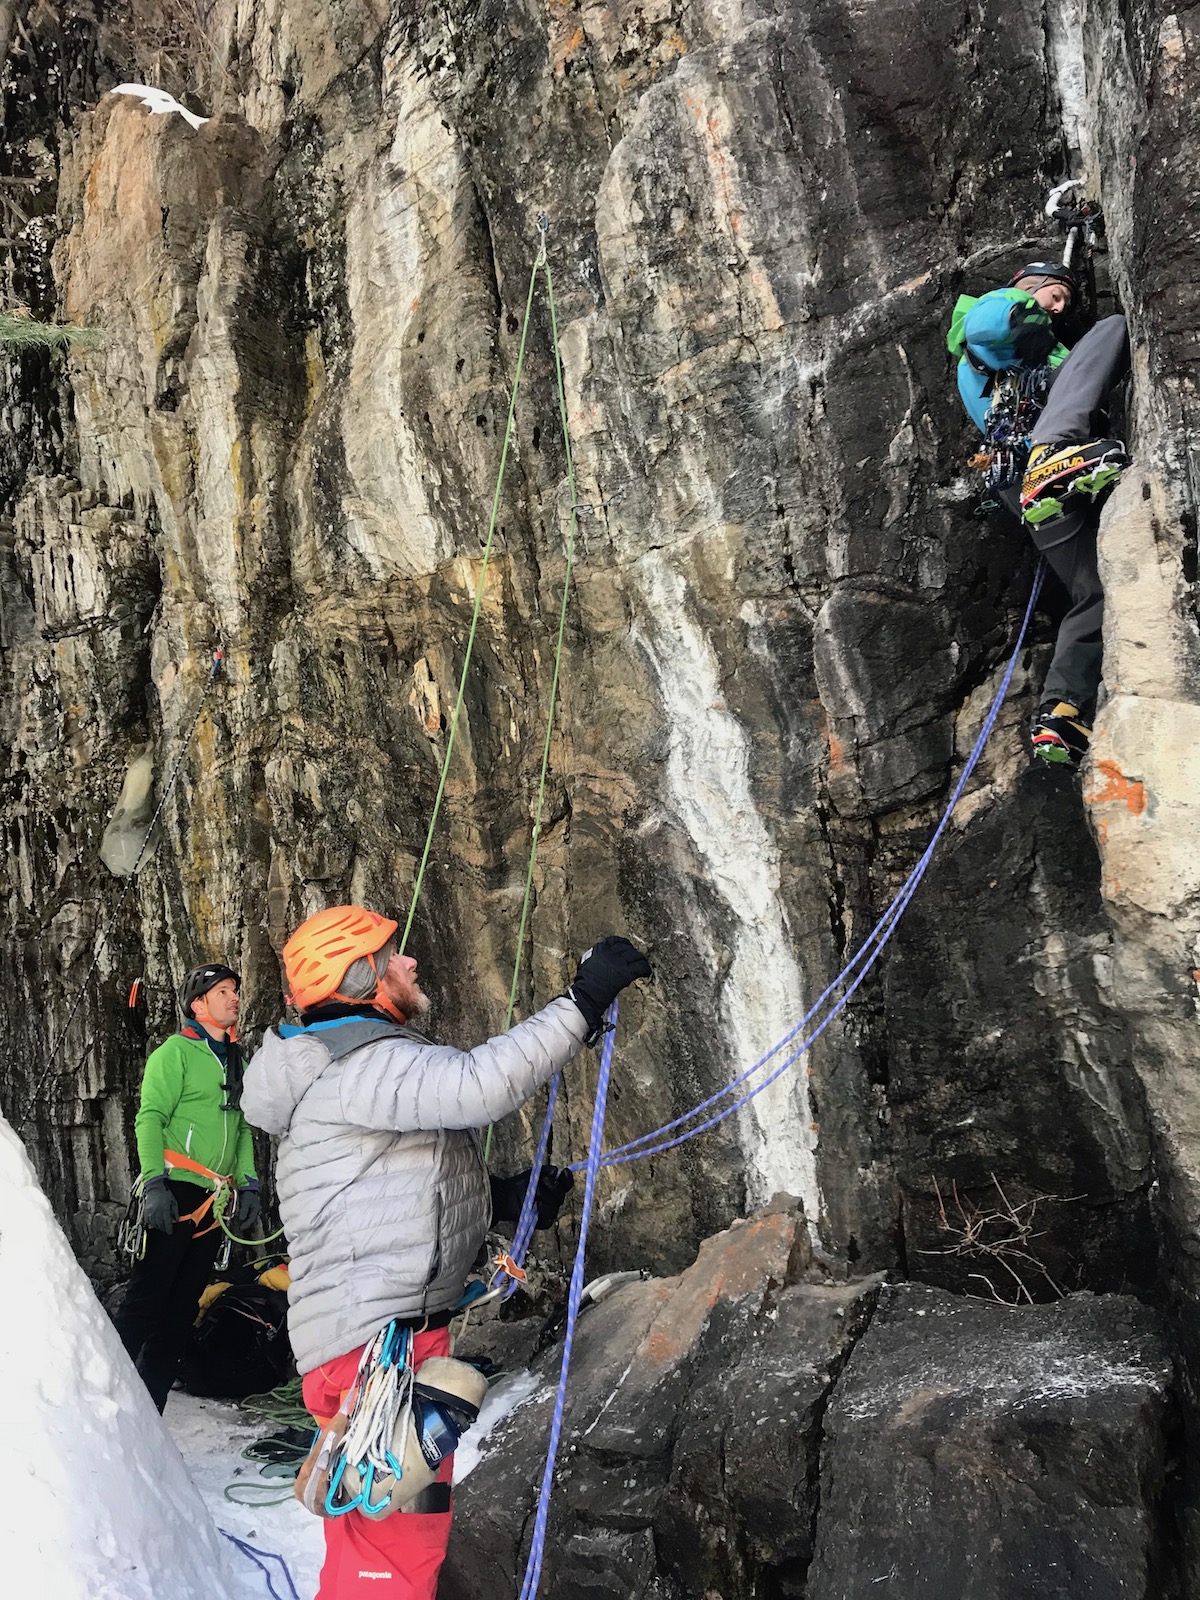 Cragging with a crew in RMNP.  The Cragsmith was perfect for outings like this. [Photo] Chris Van Leuven collection